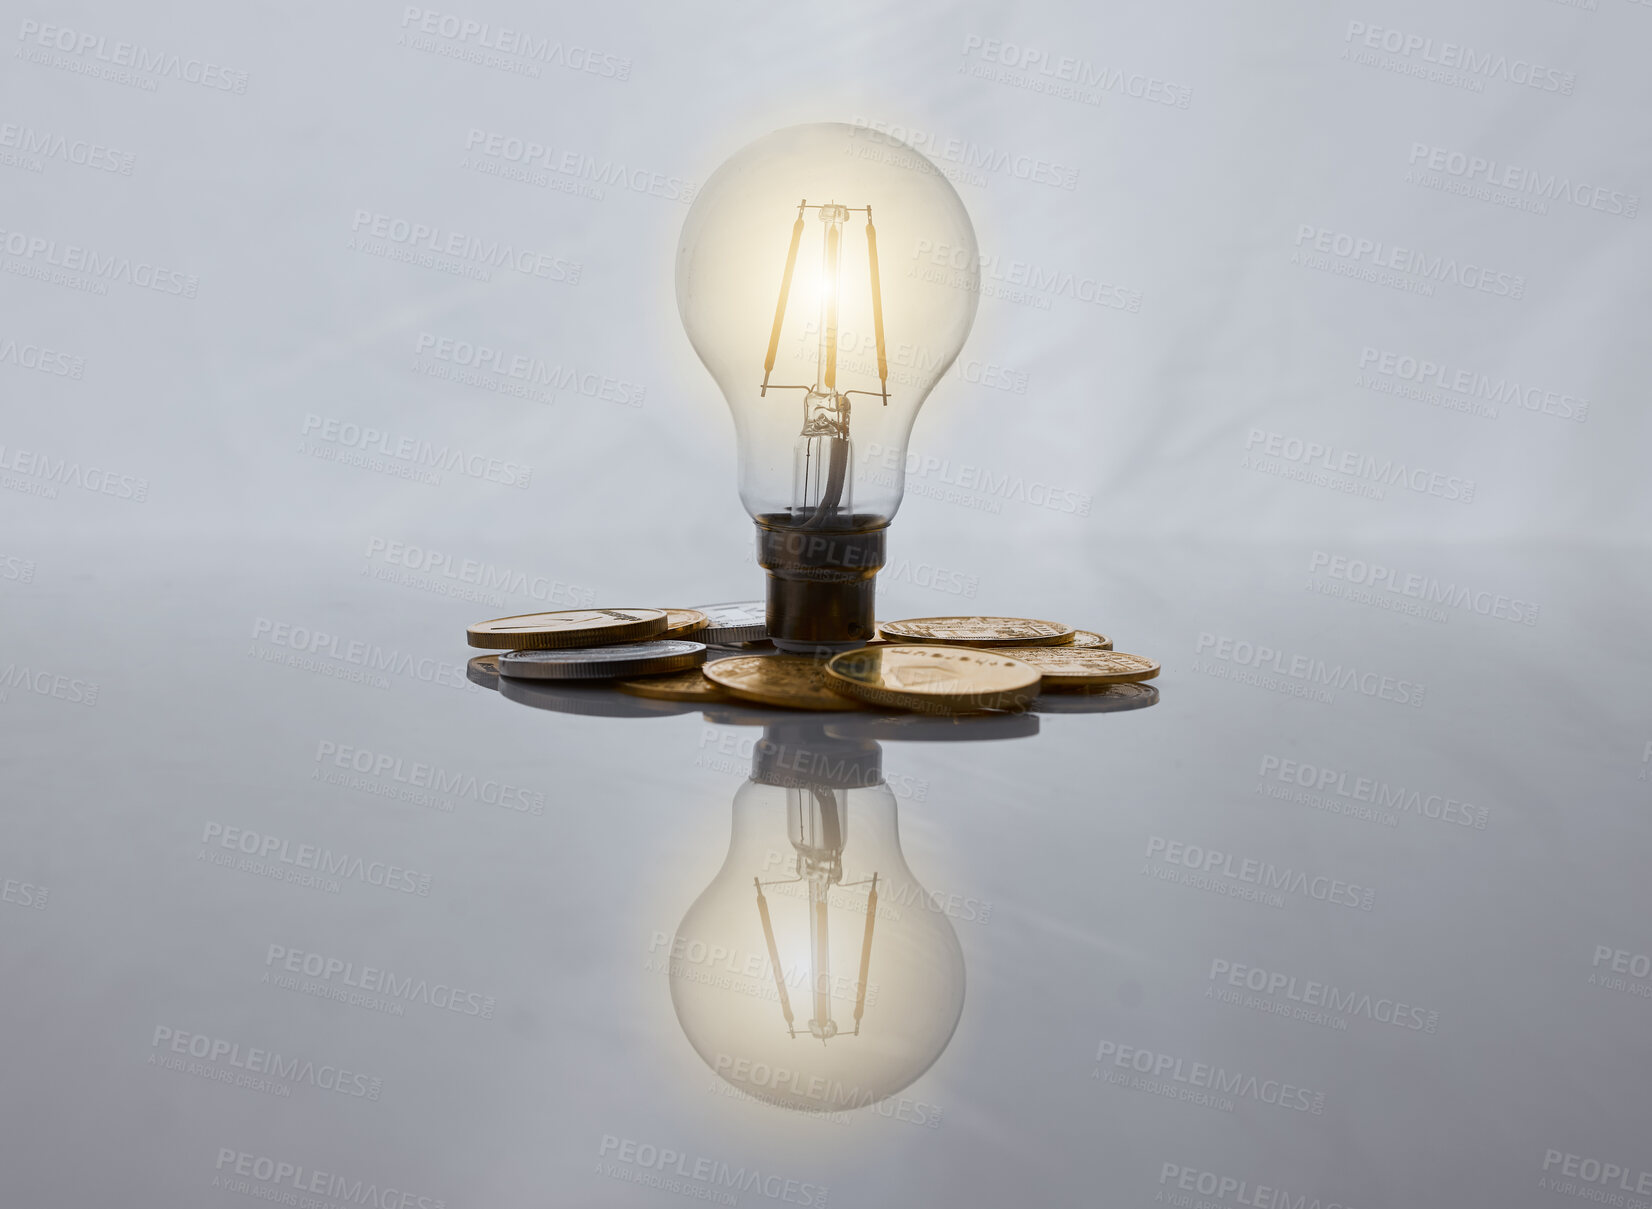 Buy stock photo Studio shot of a coin  and lightbulb against a grey background